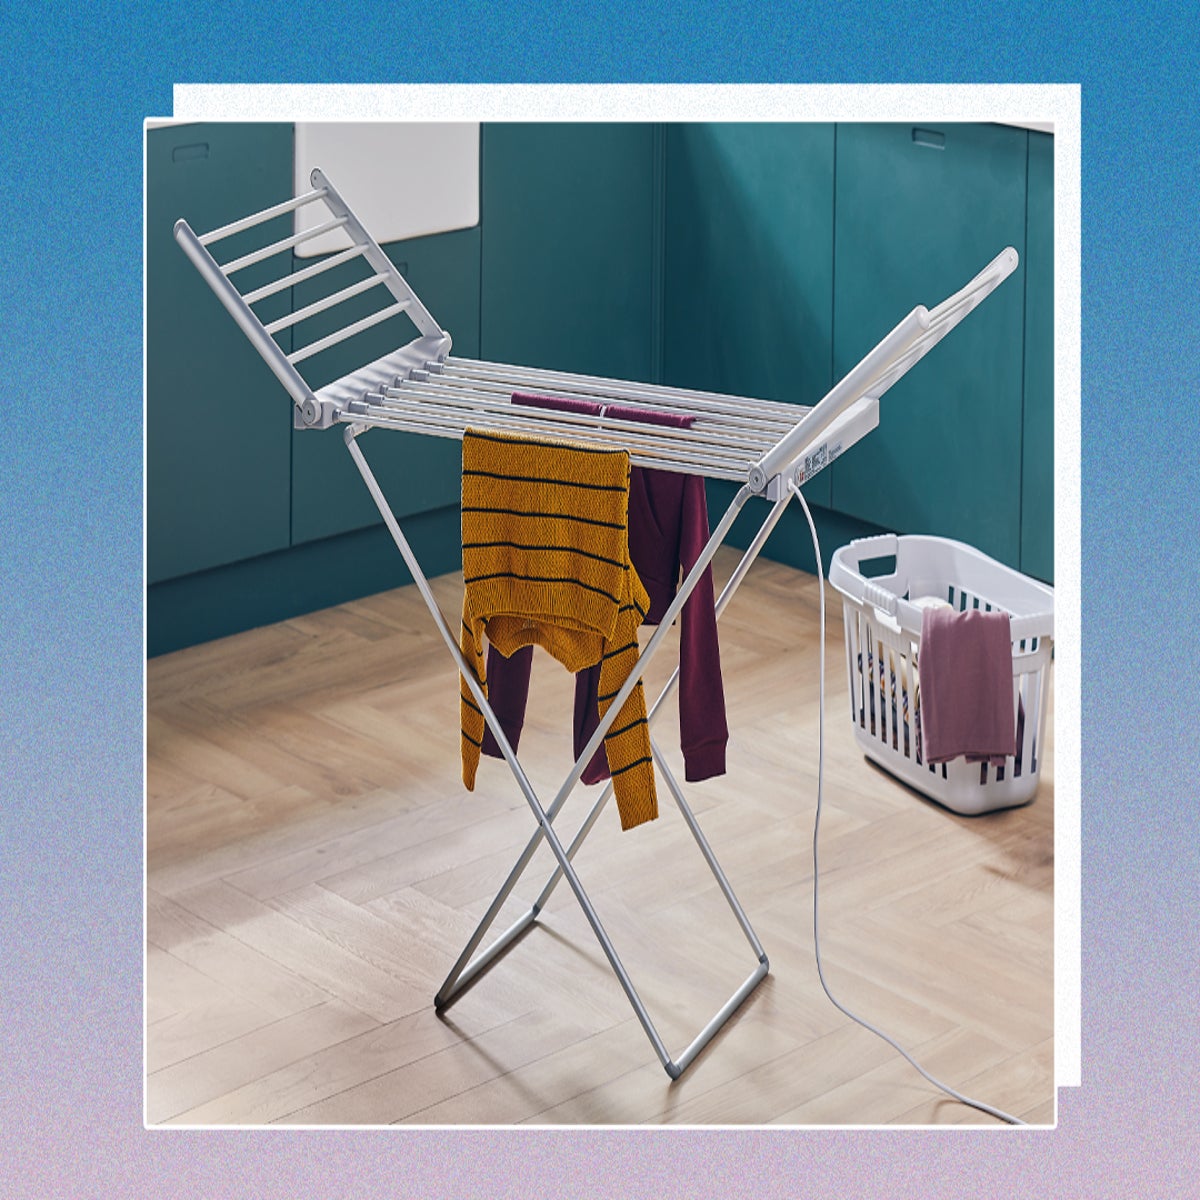 Shop Beldray 3-Tier Electric Heated Airer